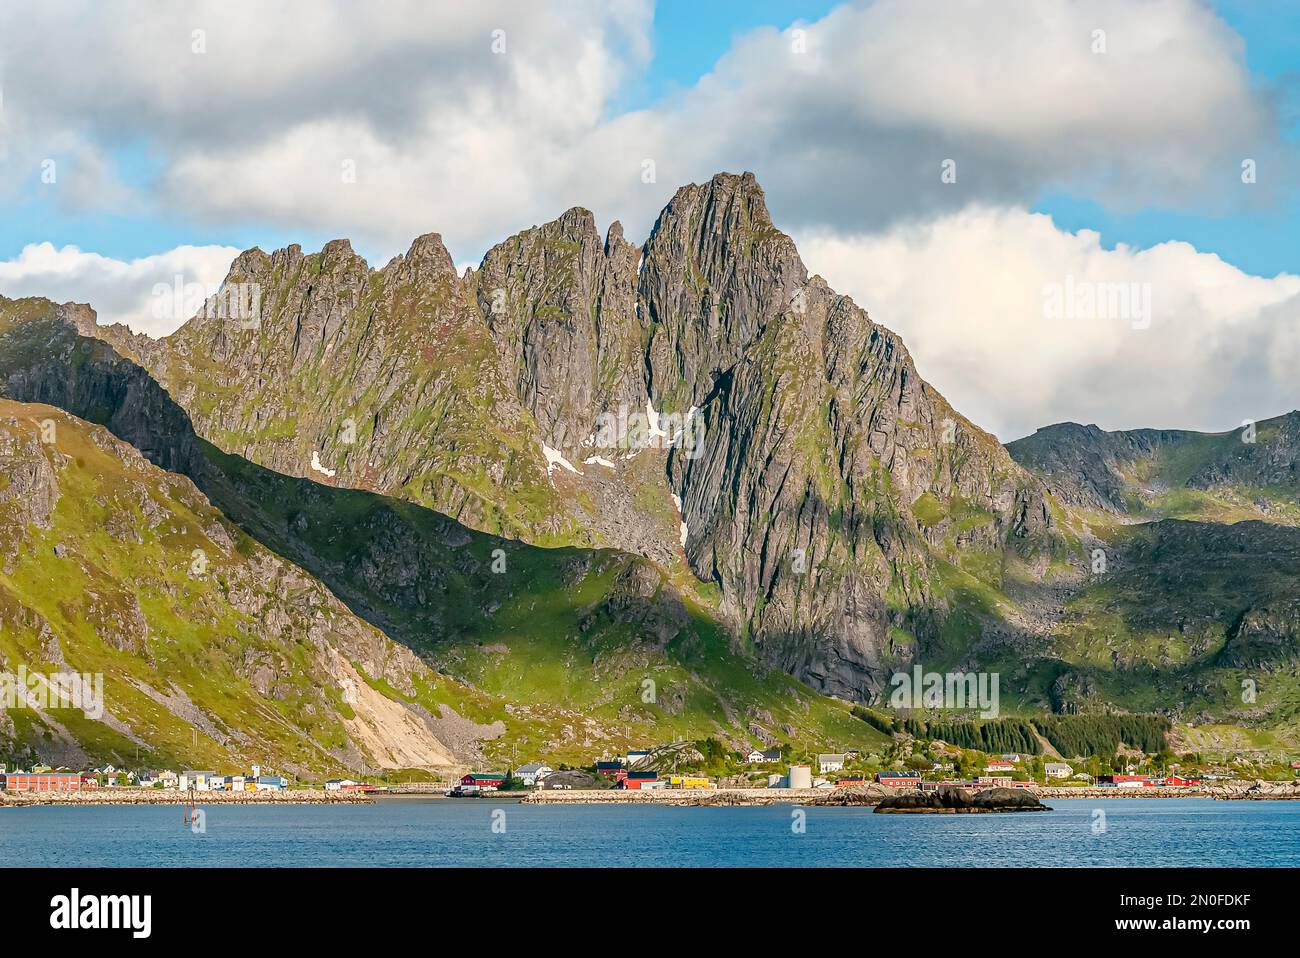 Scenic coastline at the Lofoten Islands, seen from the seaside, Norway Stock Photo